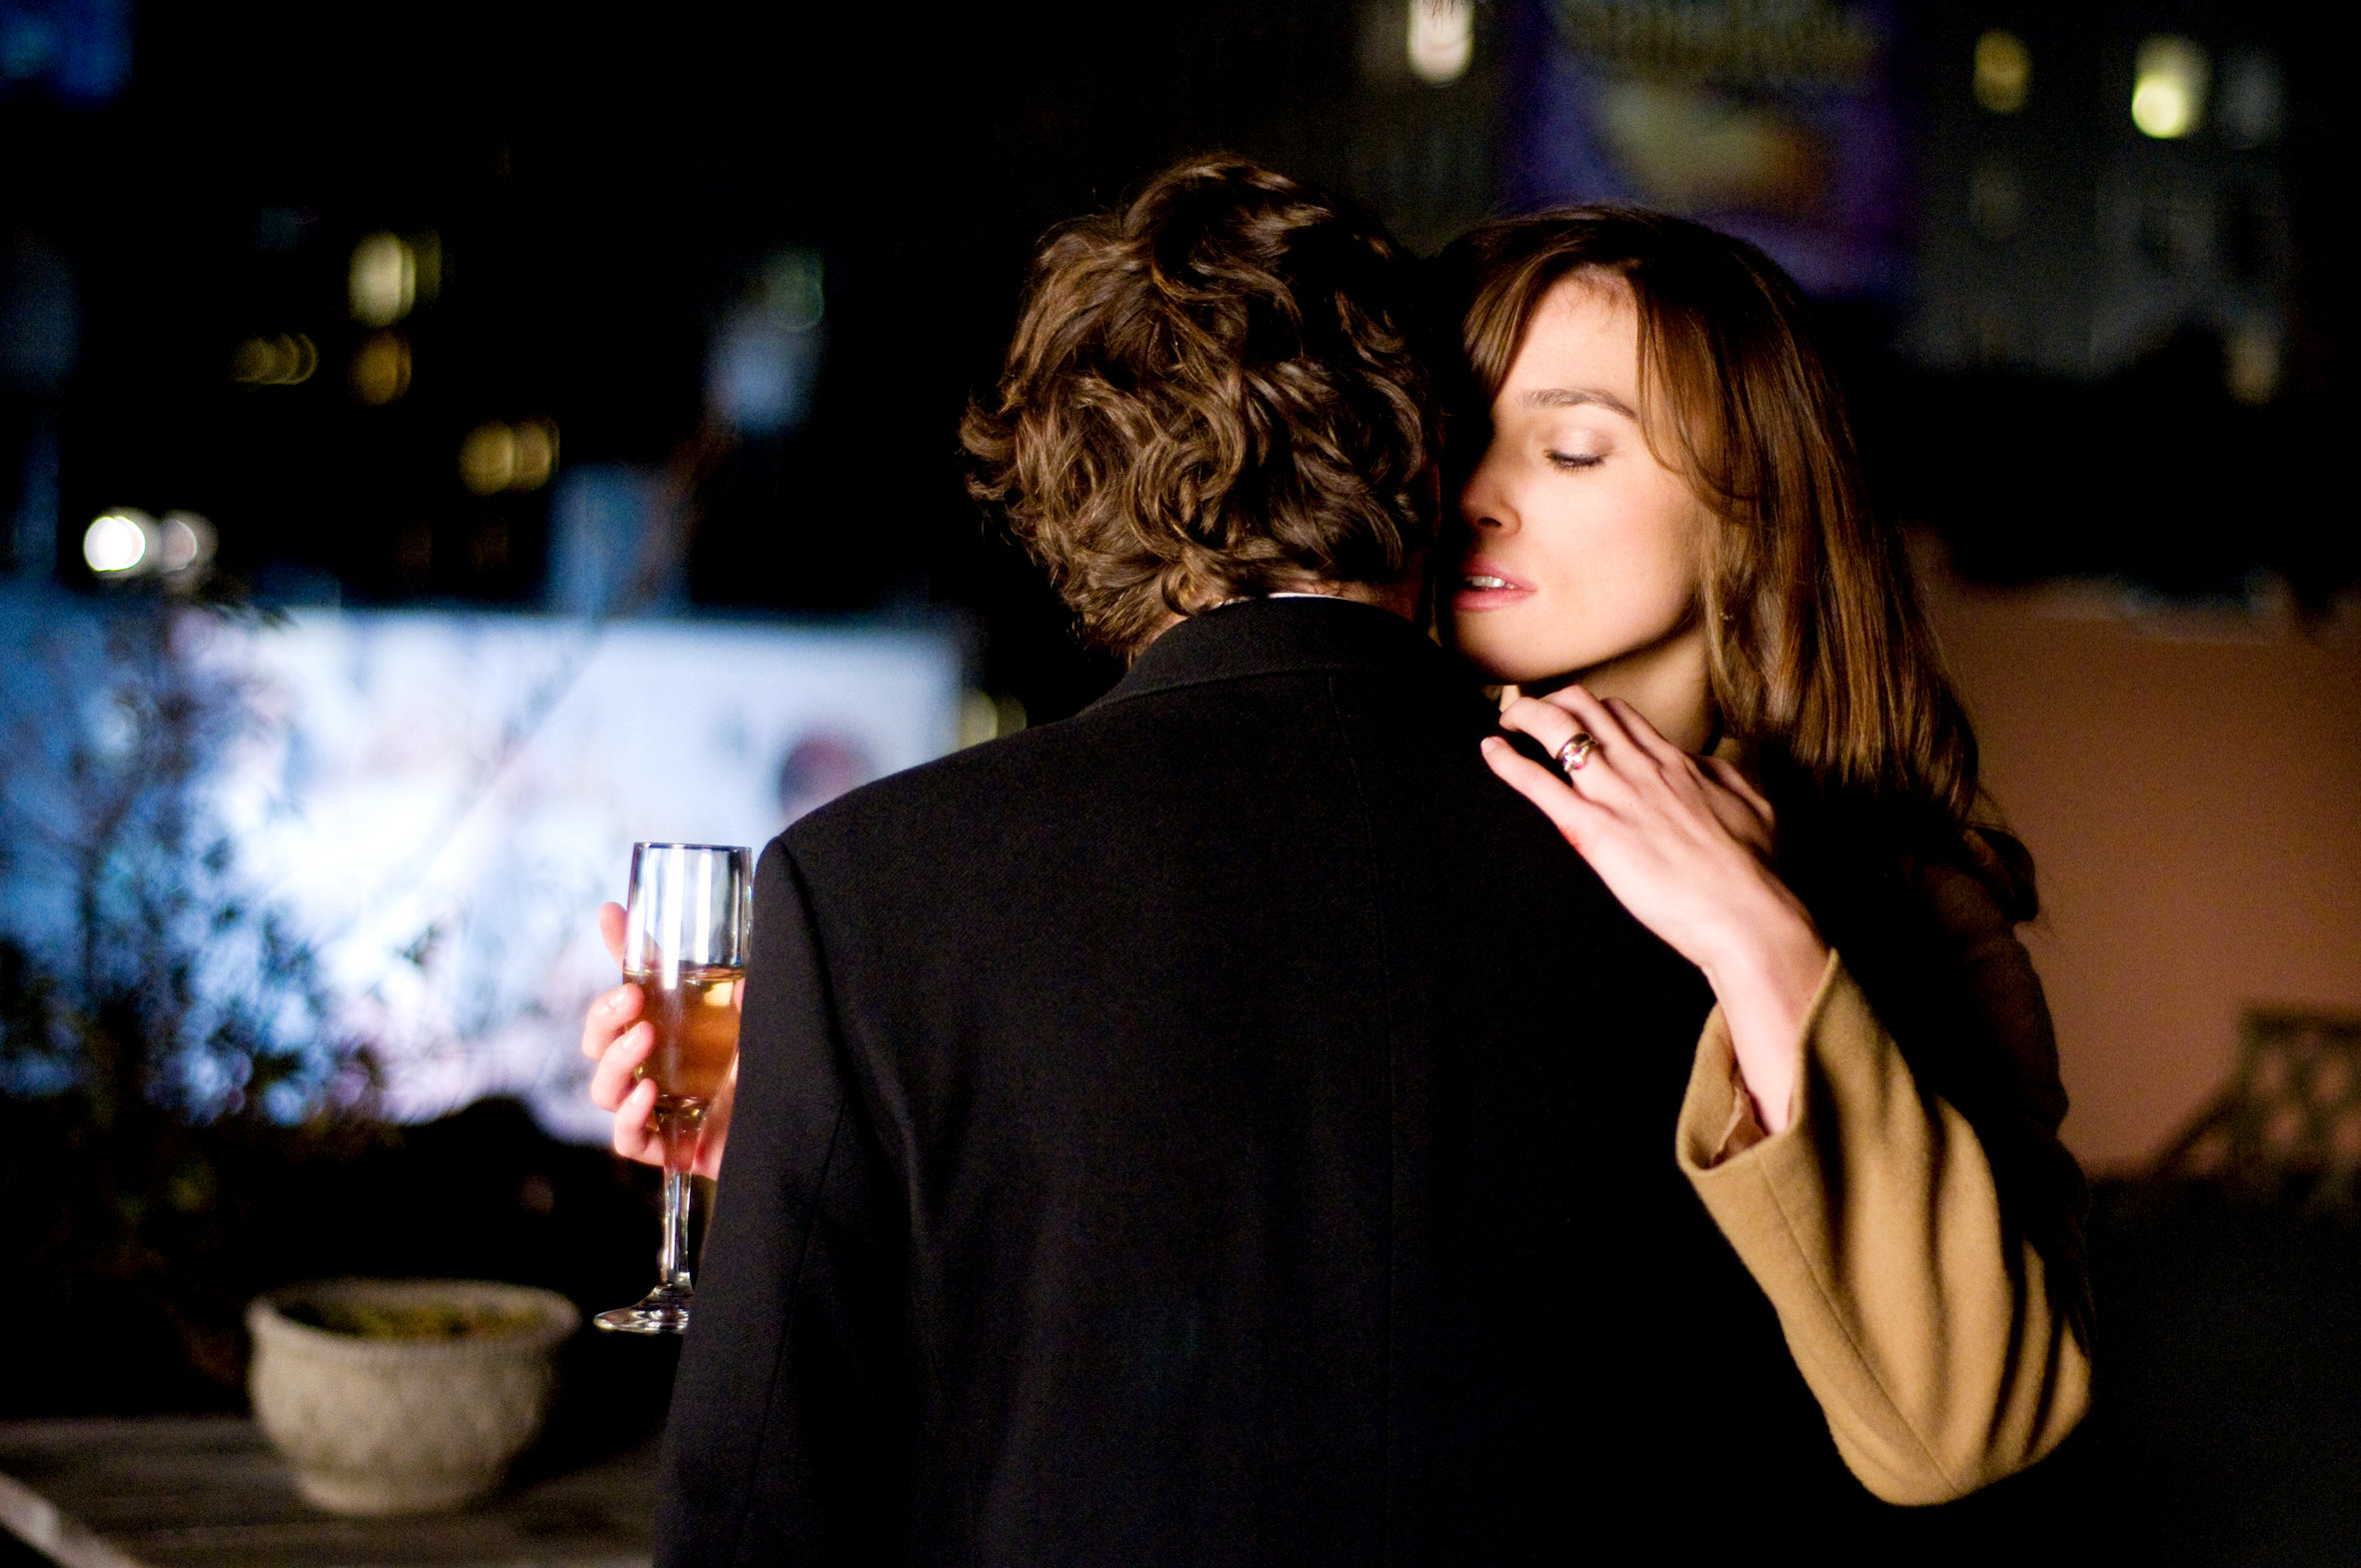 Guillaume Canet stars as Alex Mann and Keira Knightley stras as Joanna Reed in Miramax Films' Last Night (2010)